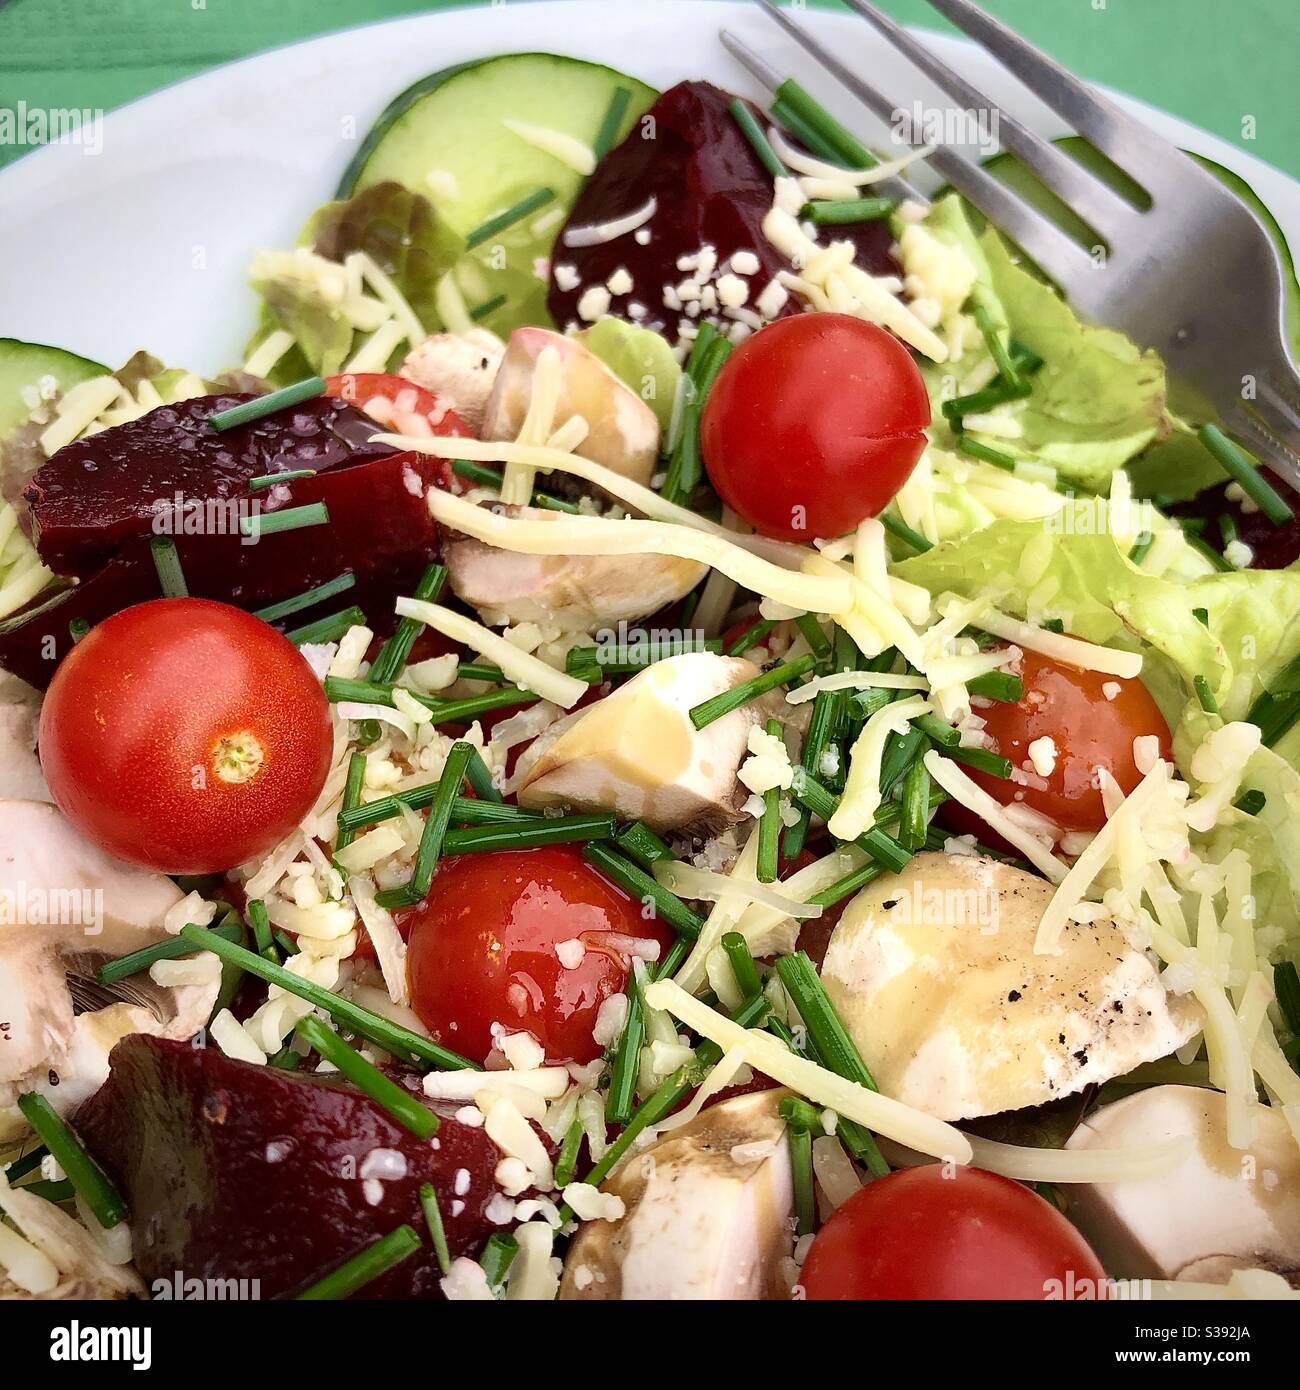 Healthy lunchtime vegetarian salad. Stock Photo